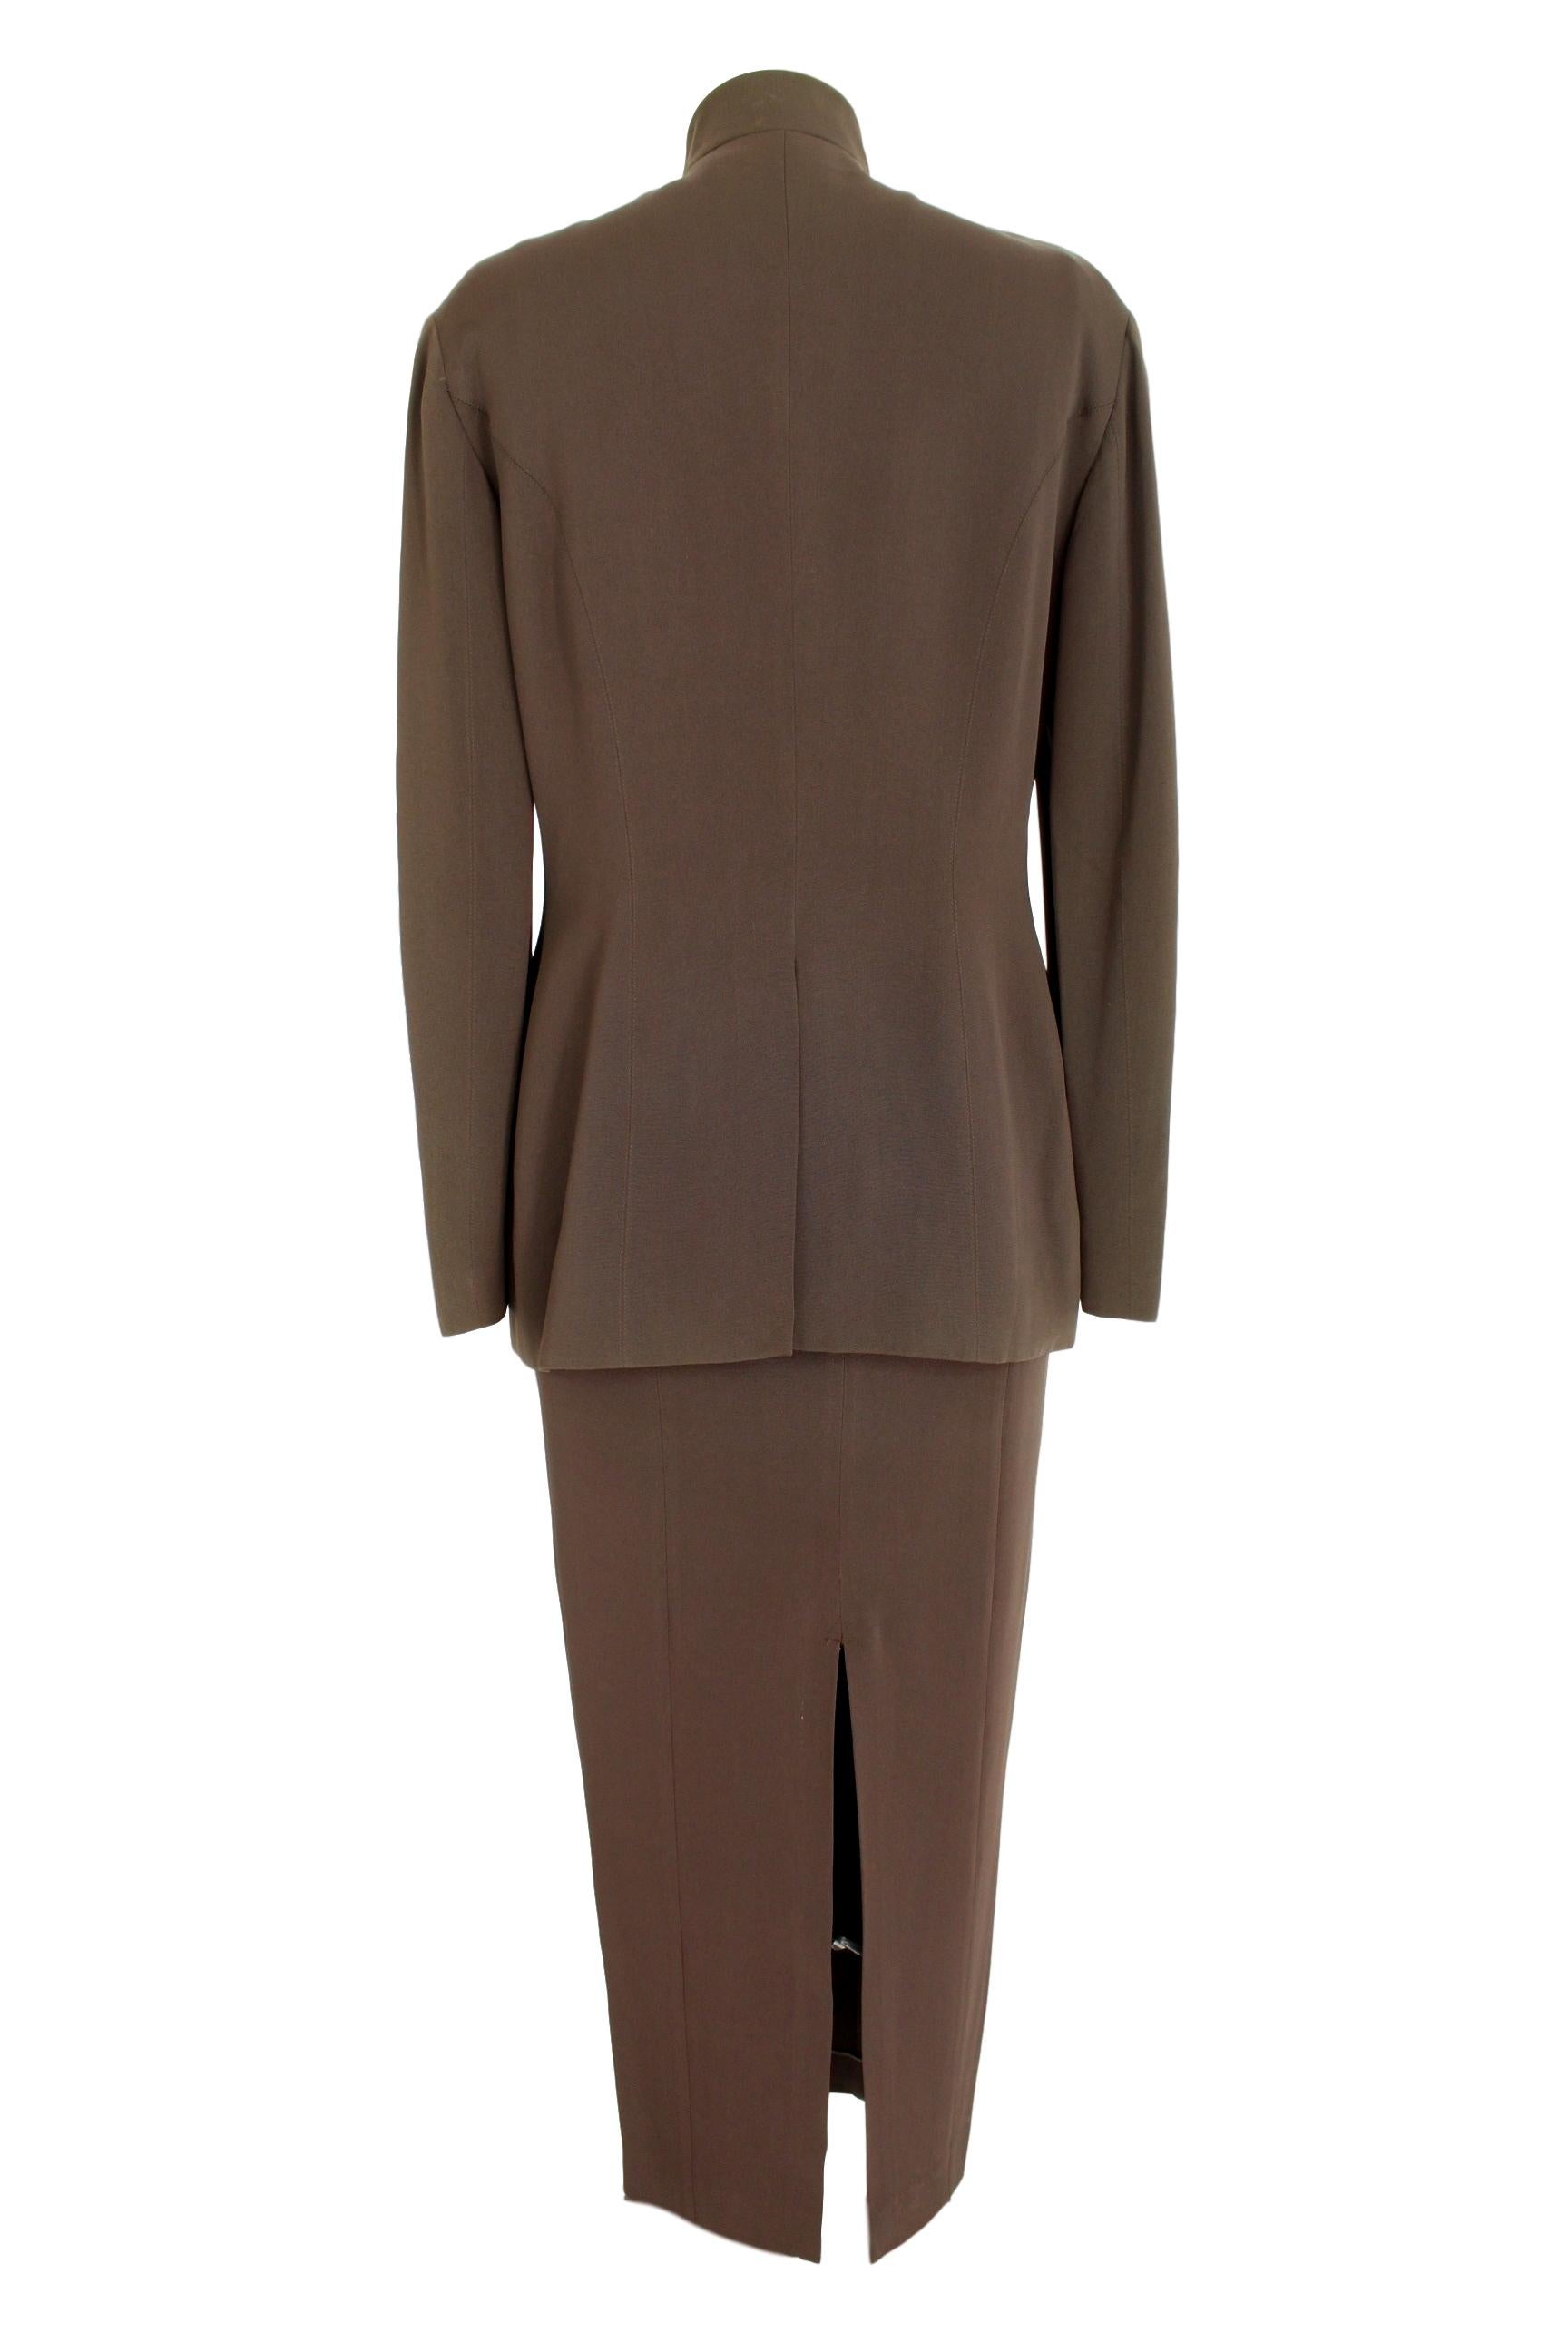 Rifat Ozbek women's vintage 90s suit dress. Jacket and dress color brown, long dress type sheath dress, 62% acetate 38% rayon. Made in Italy. Excellent vintage conditions.

Jacket size: 44 It 10 Us 12 Uk
Dress size: 42 It 8 Us 10 Uk


Jacket